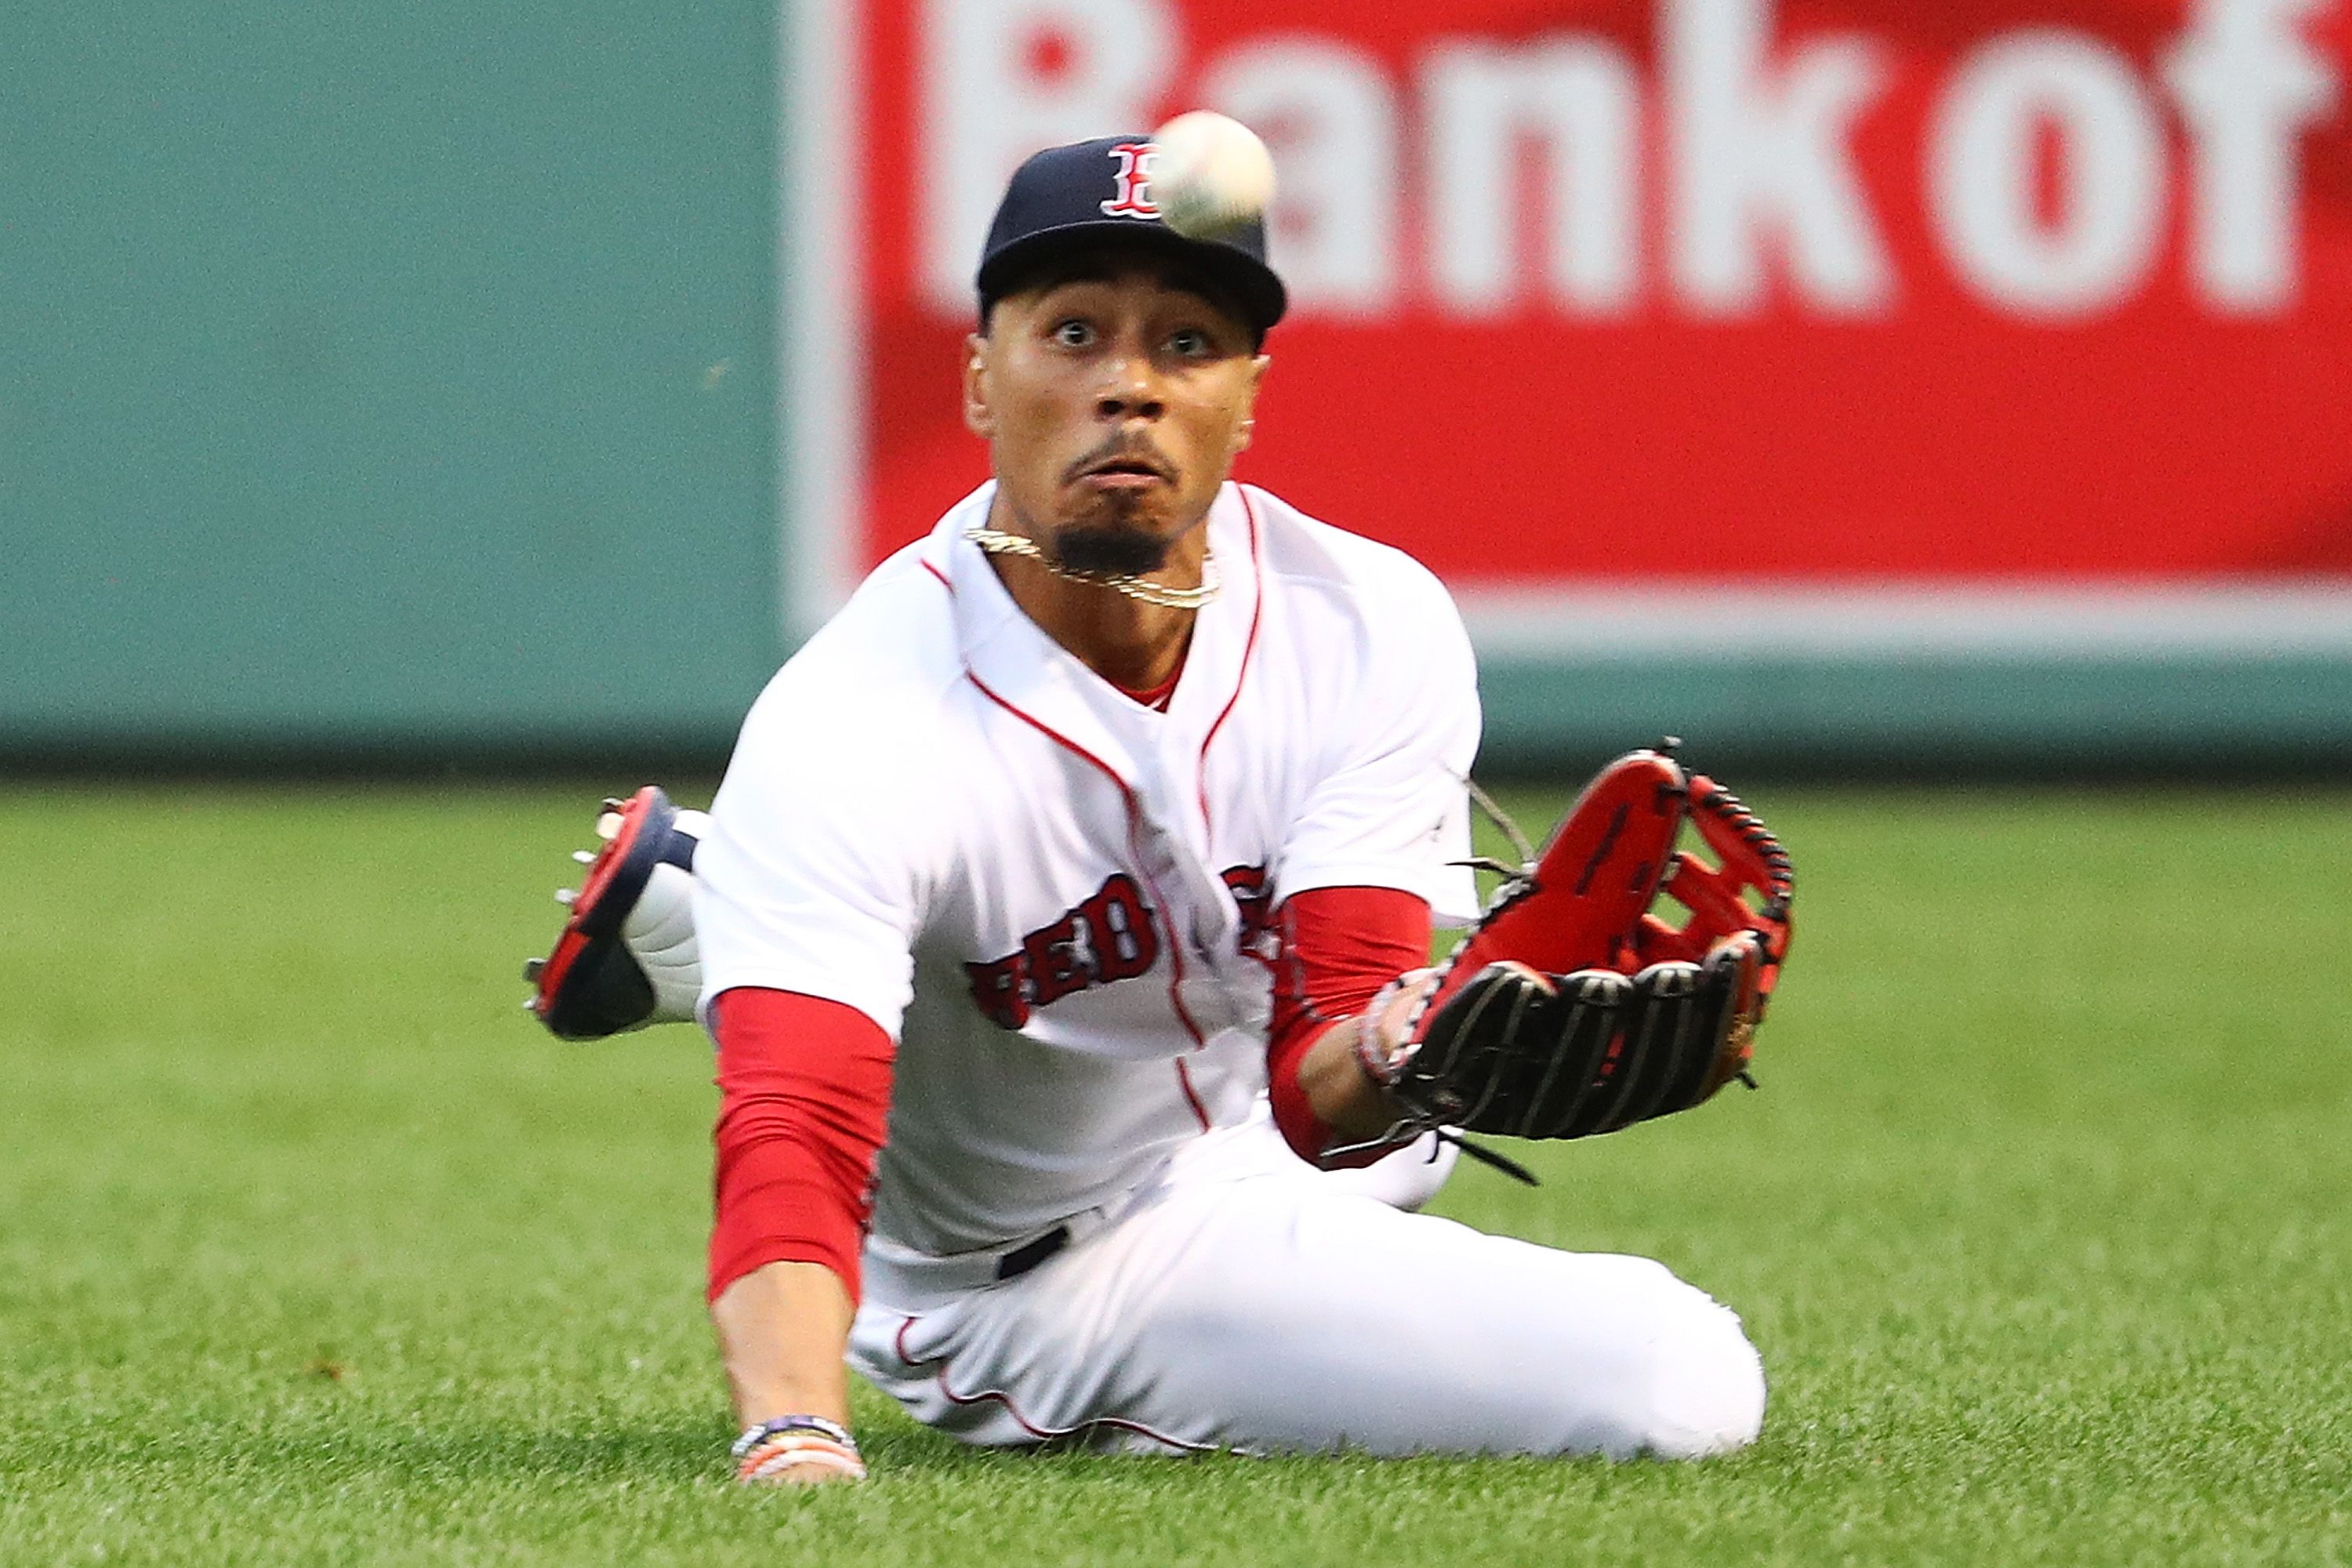 Boston Red Sox's Mookie Betts wins fourth straight Gold Glove